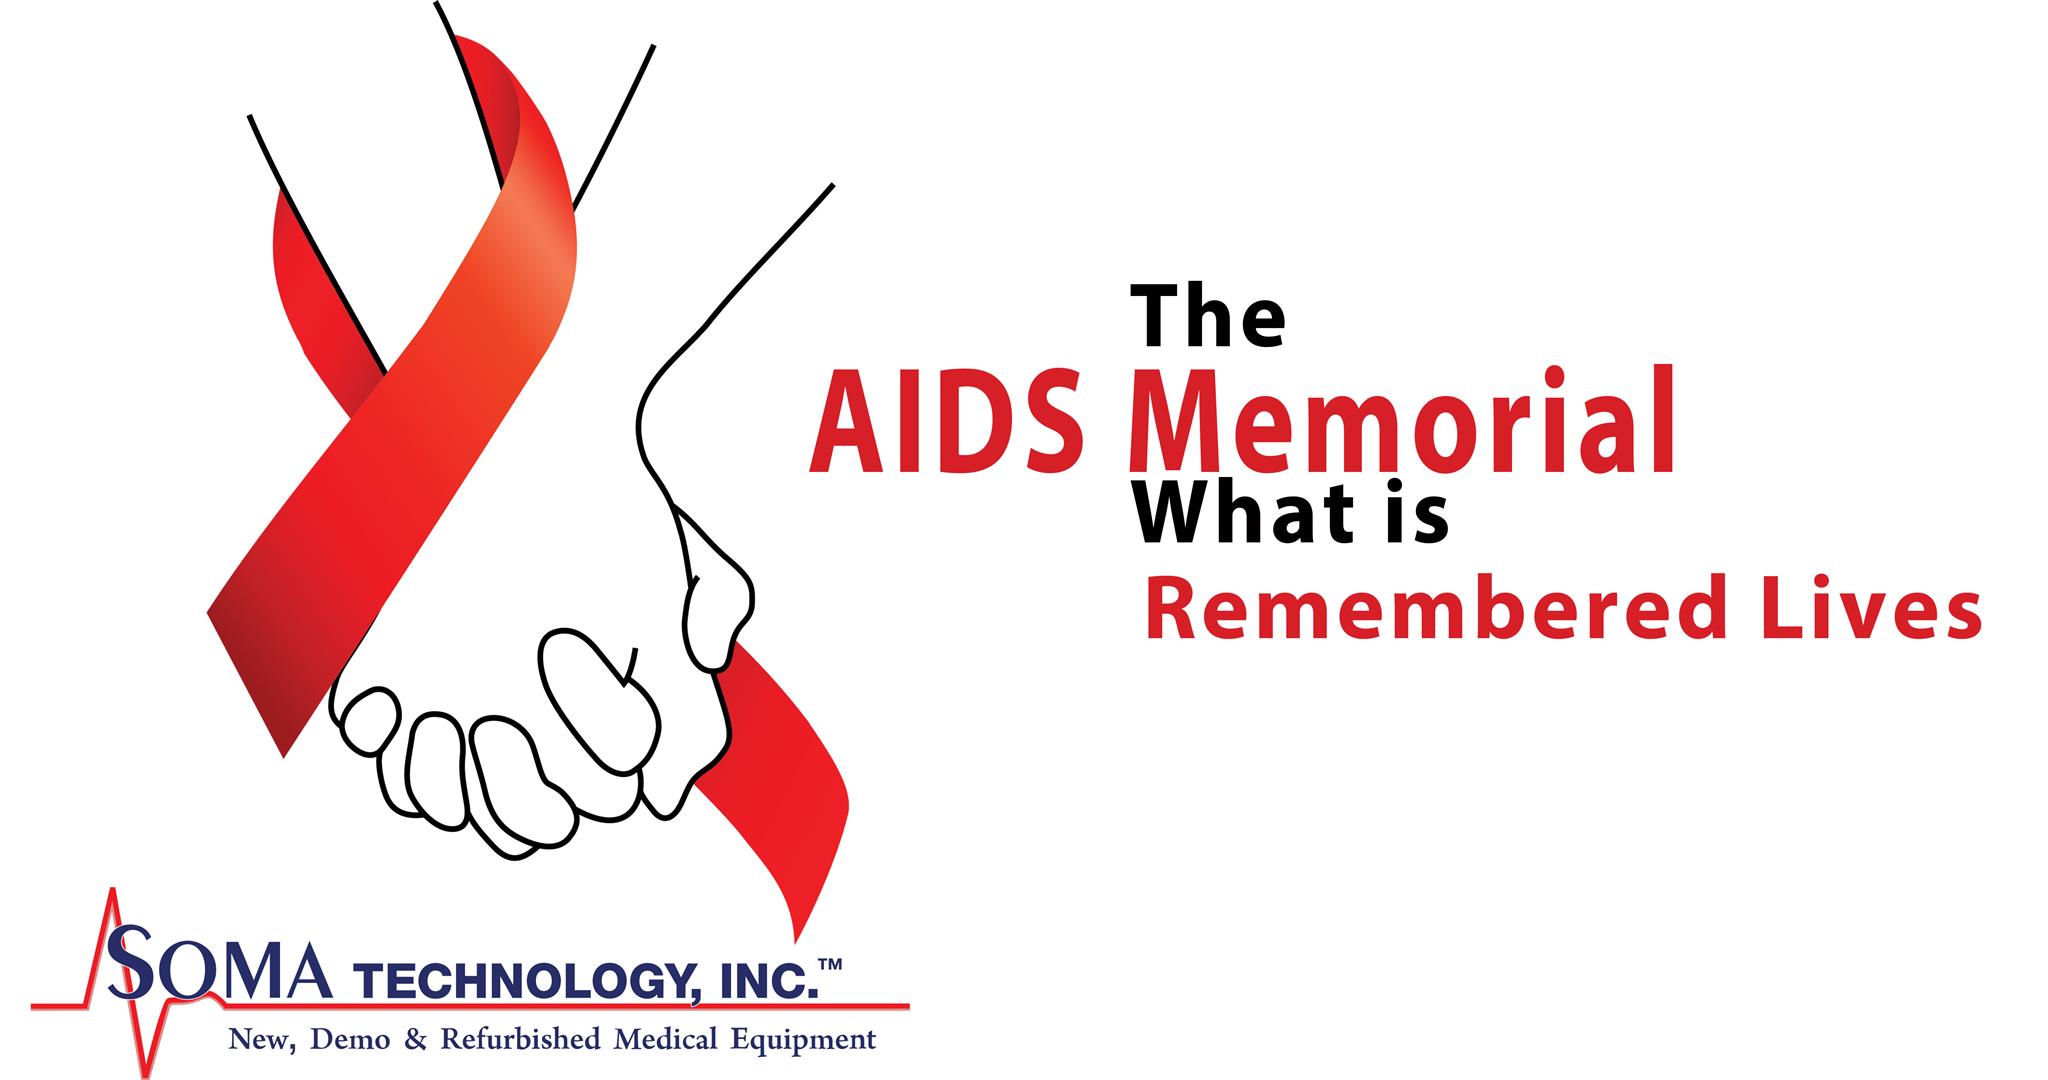 The AIDS Memorial: What is Remembered Lives